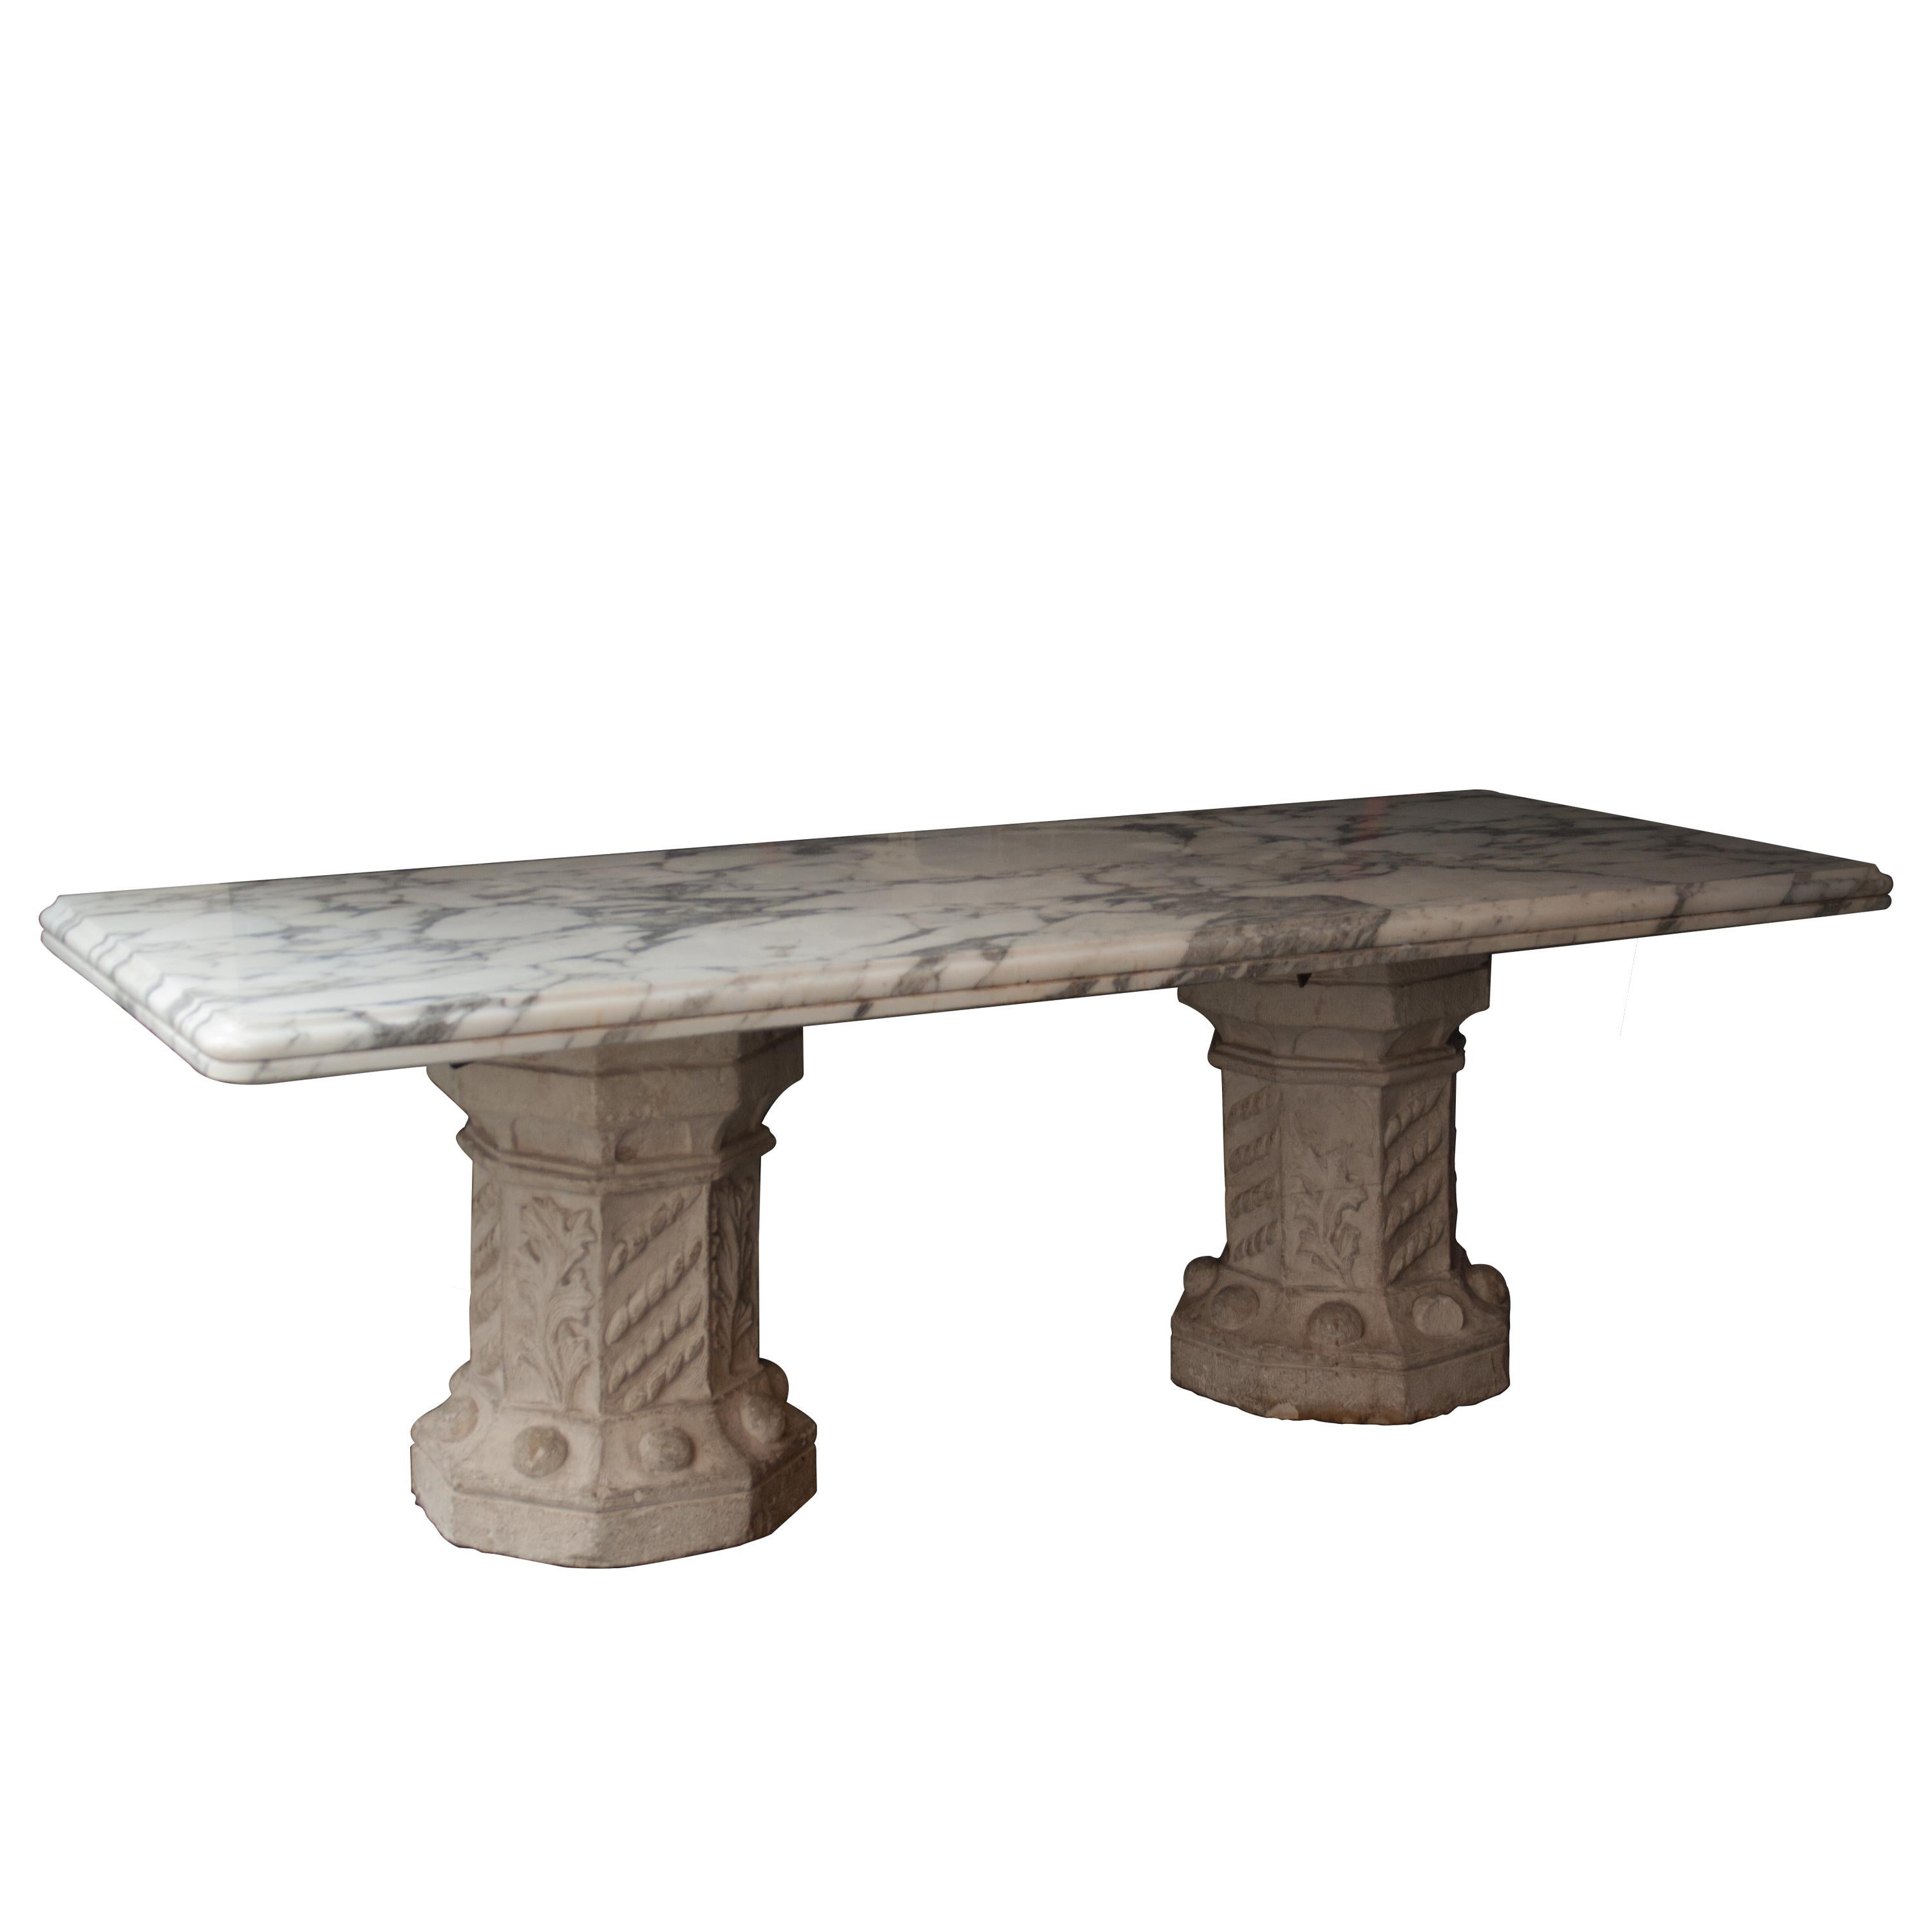 Impressive marble table. With limestone handcrafted columns taken from the Medinaceli Palace. XIX century palace in the center of Madrid disappeared in 1964. Columns were used as legs in Angulema stone with 4 cm white marble with brown vein top for